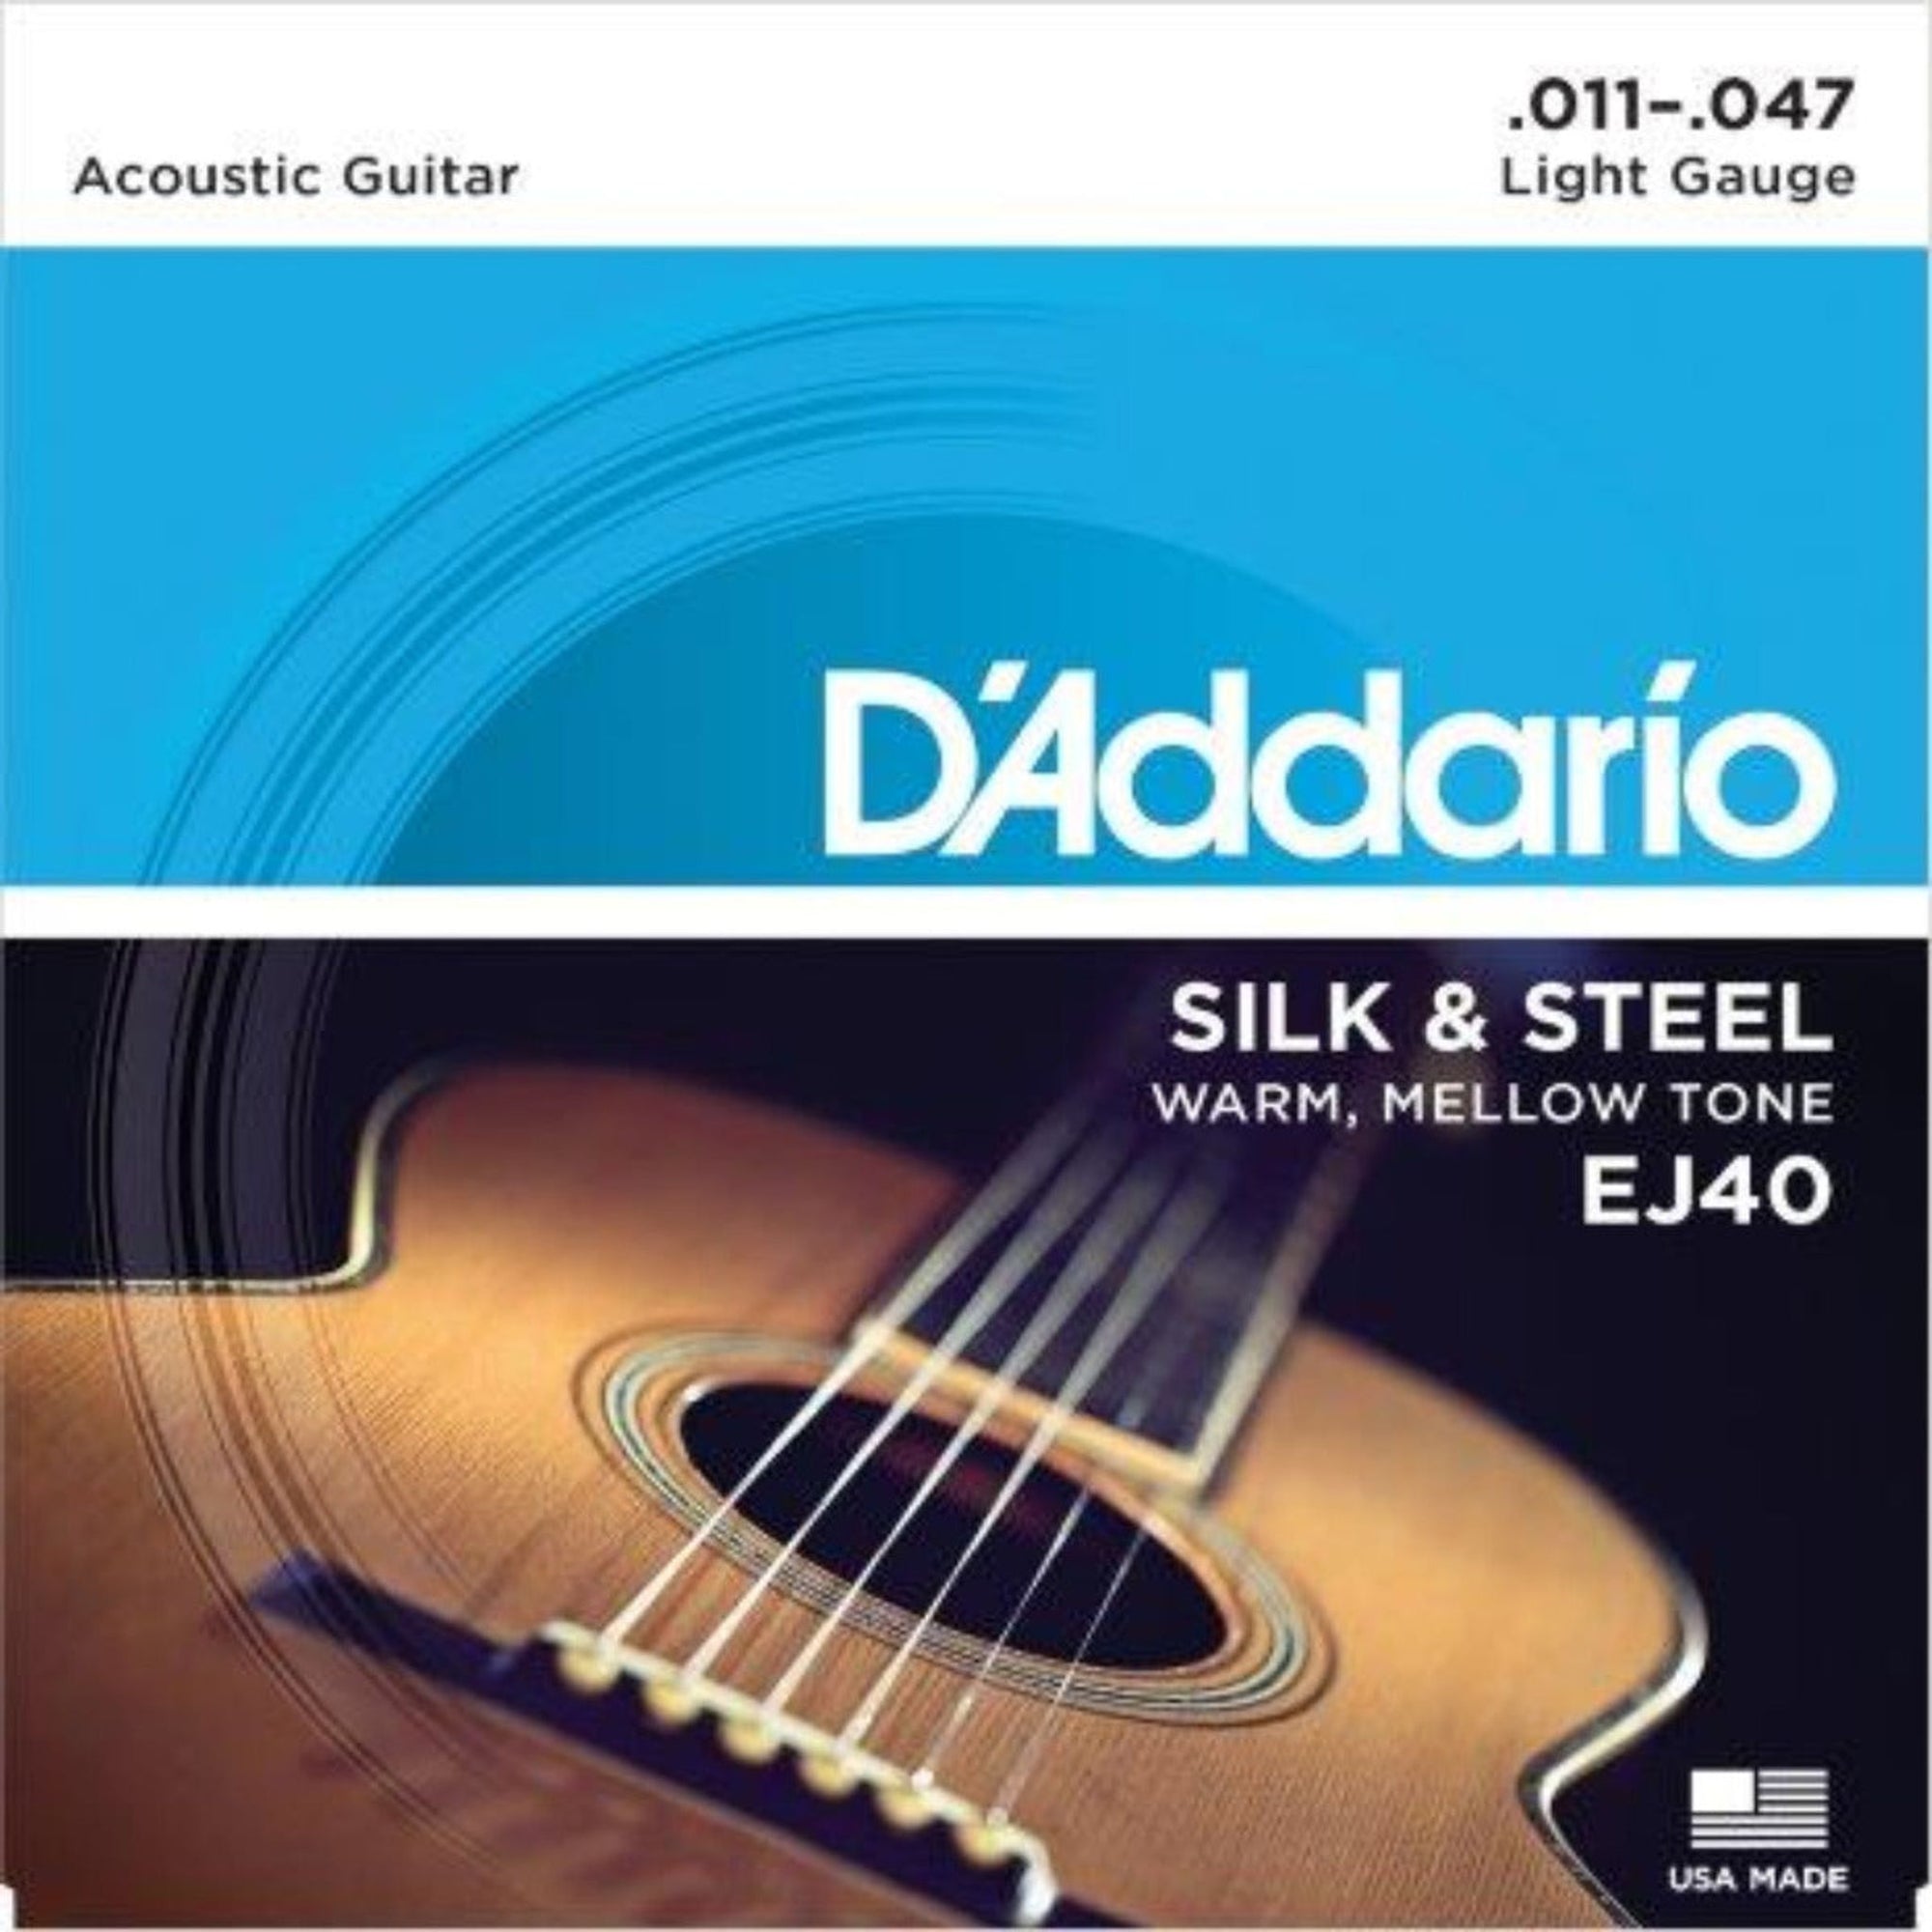 EJ40 Silk & Steel strings are designed and gauged specifically for guitarists who use traditional fingerstyle methods and prefer a warm, mellow tone. 